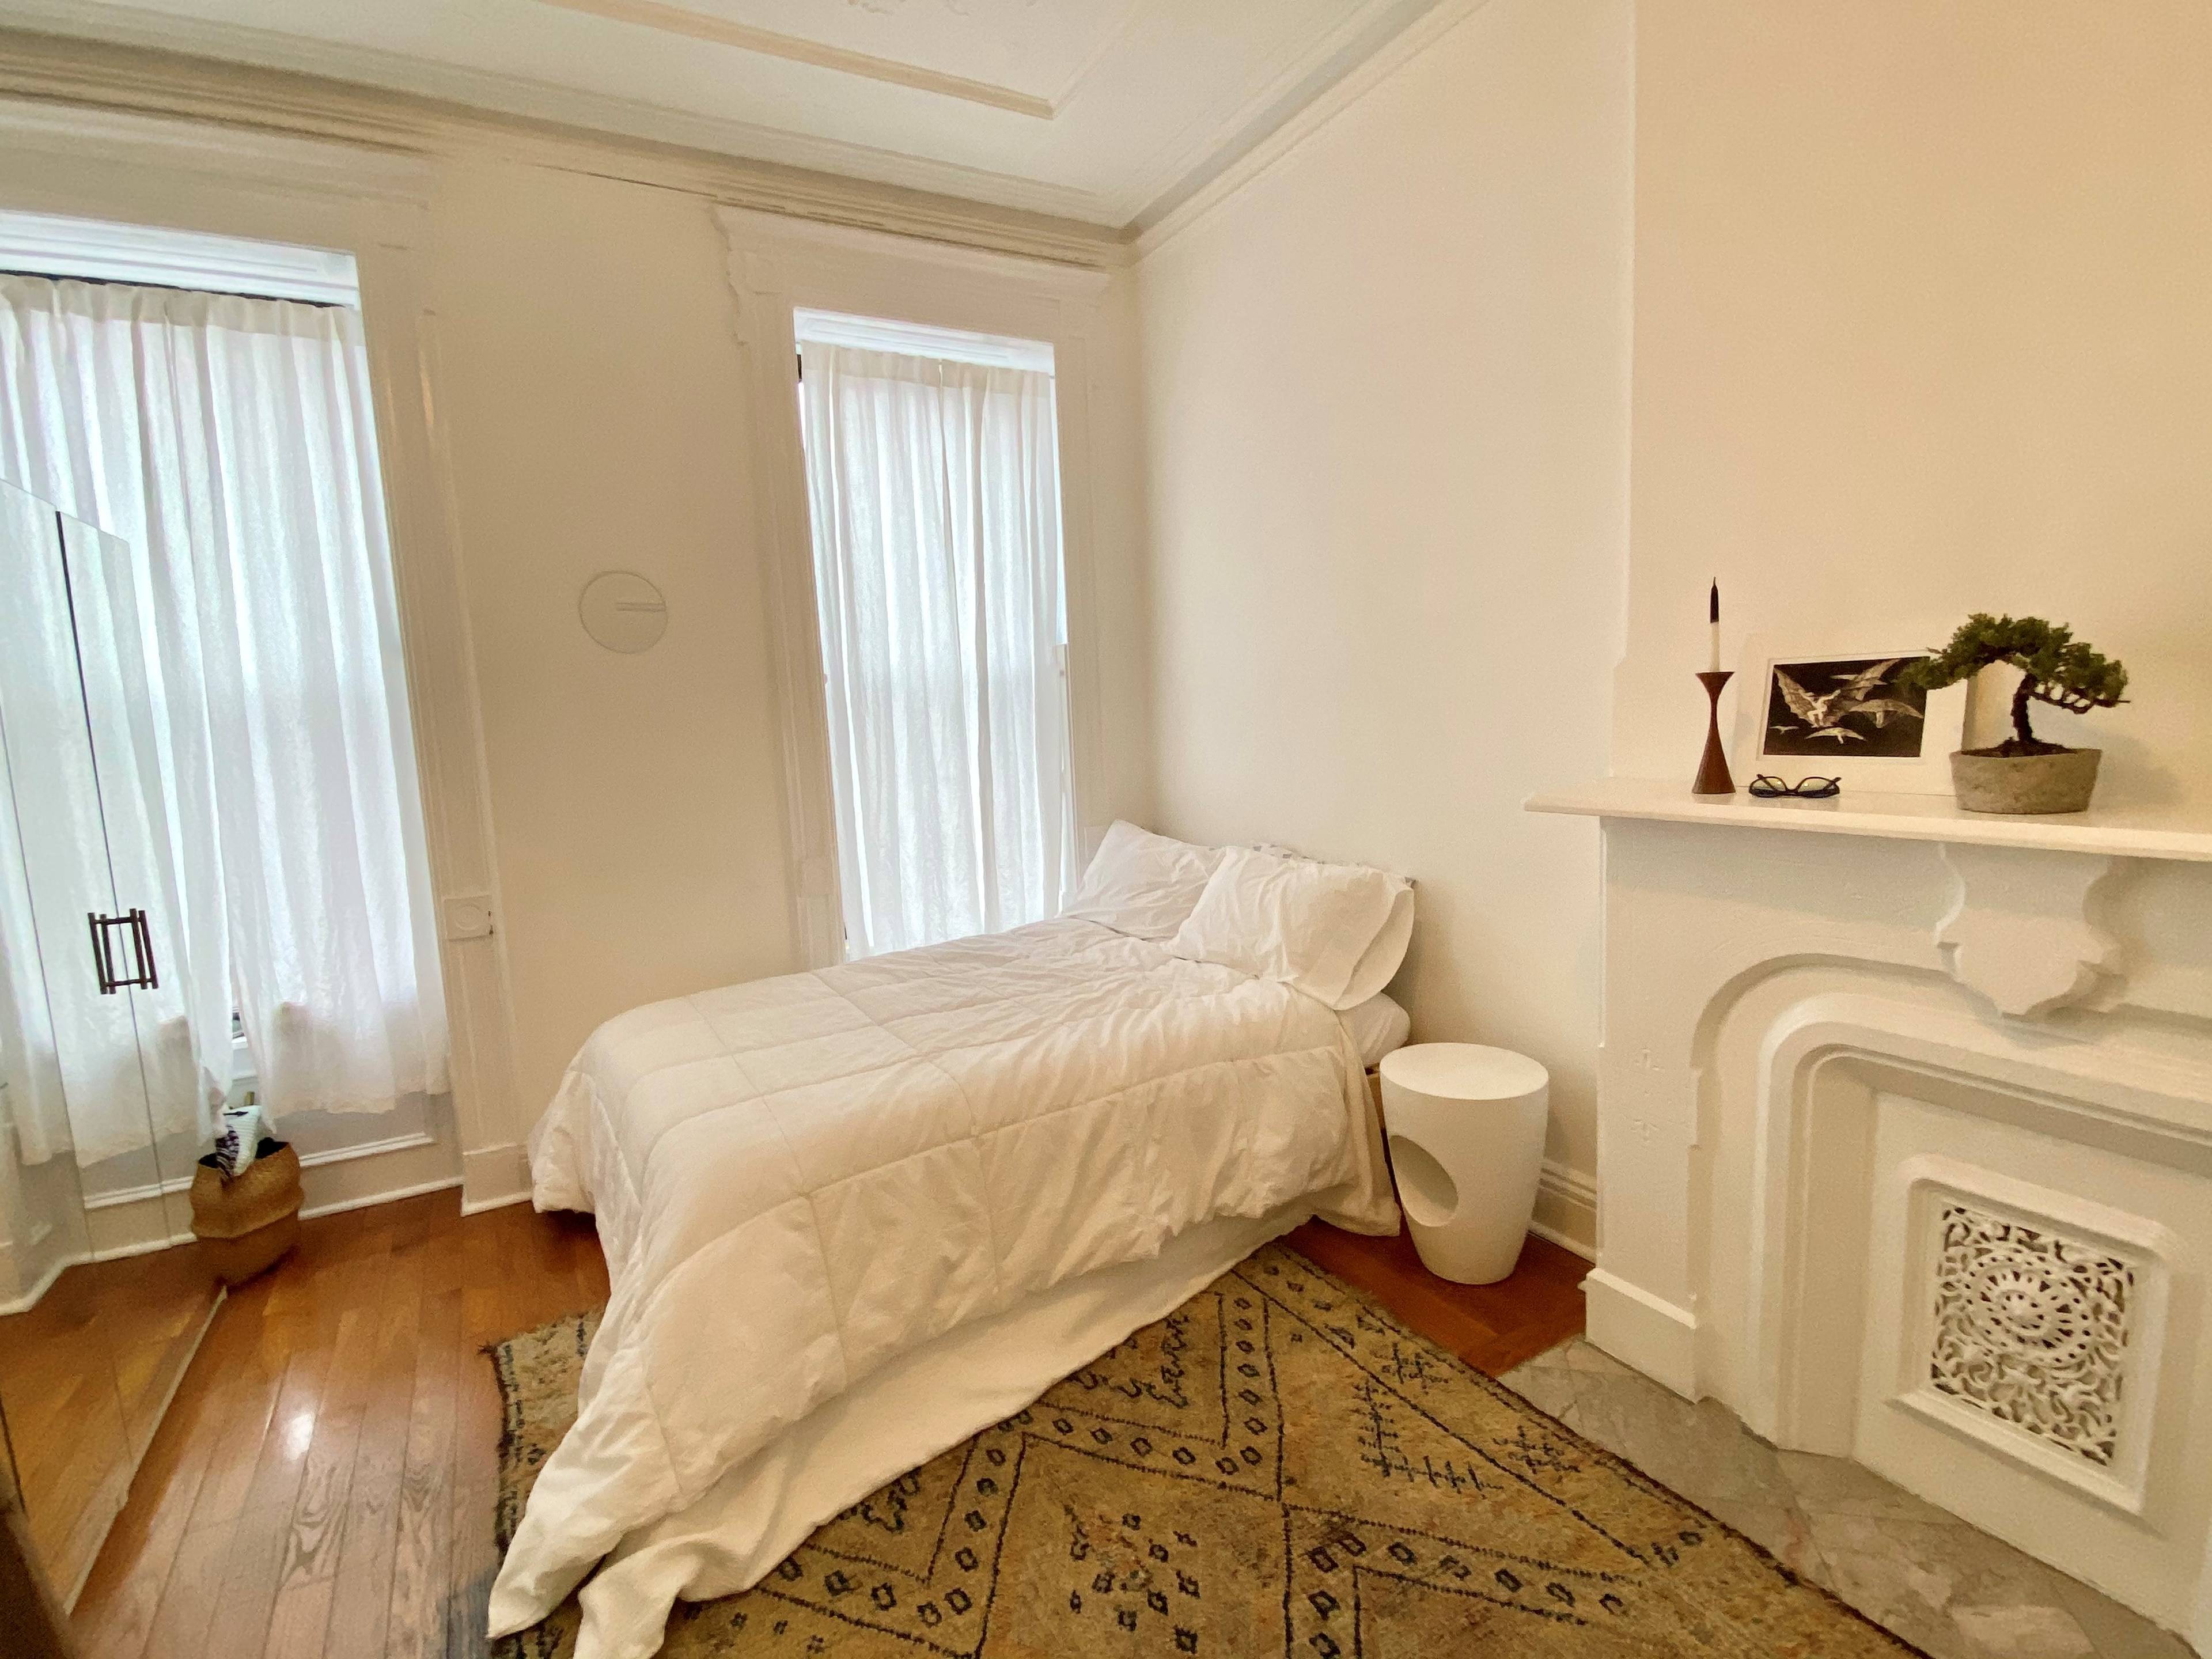 Located on the border of Clinton Hill amp ; Bed Stuy, this unit gives VALUE, SPACE amp ; STYLE This FULL FLOOR unit residence has an airy feel with high ...